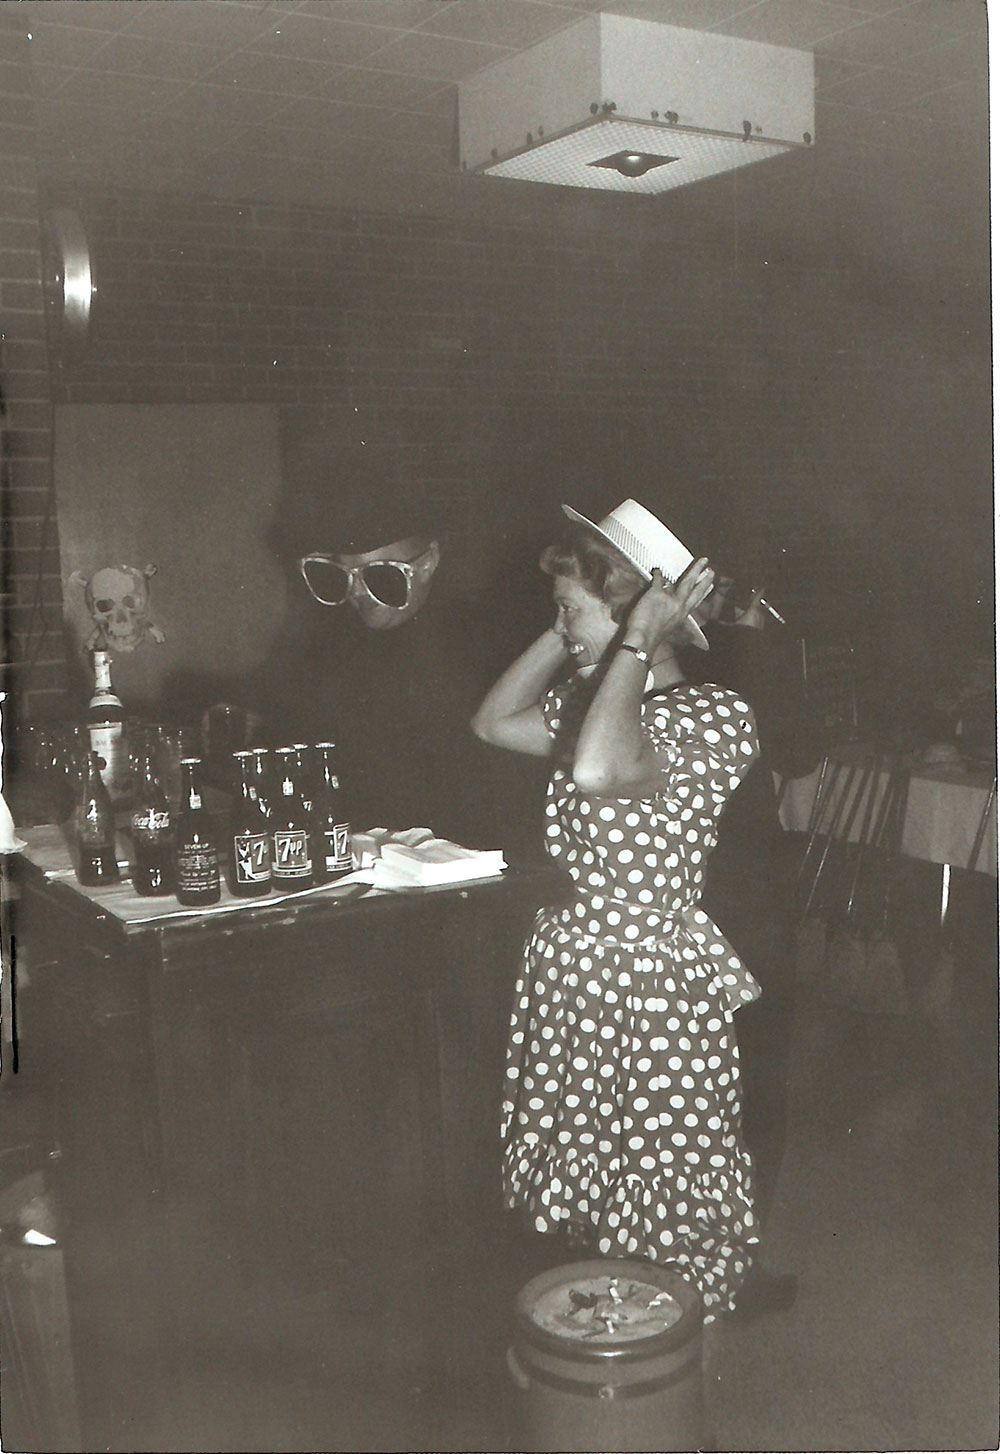 (FNB.2010.11.16) - Halloween Party, c. early 1960s